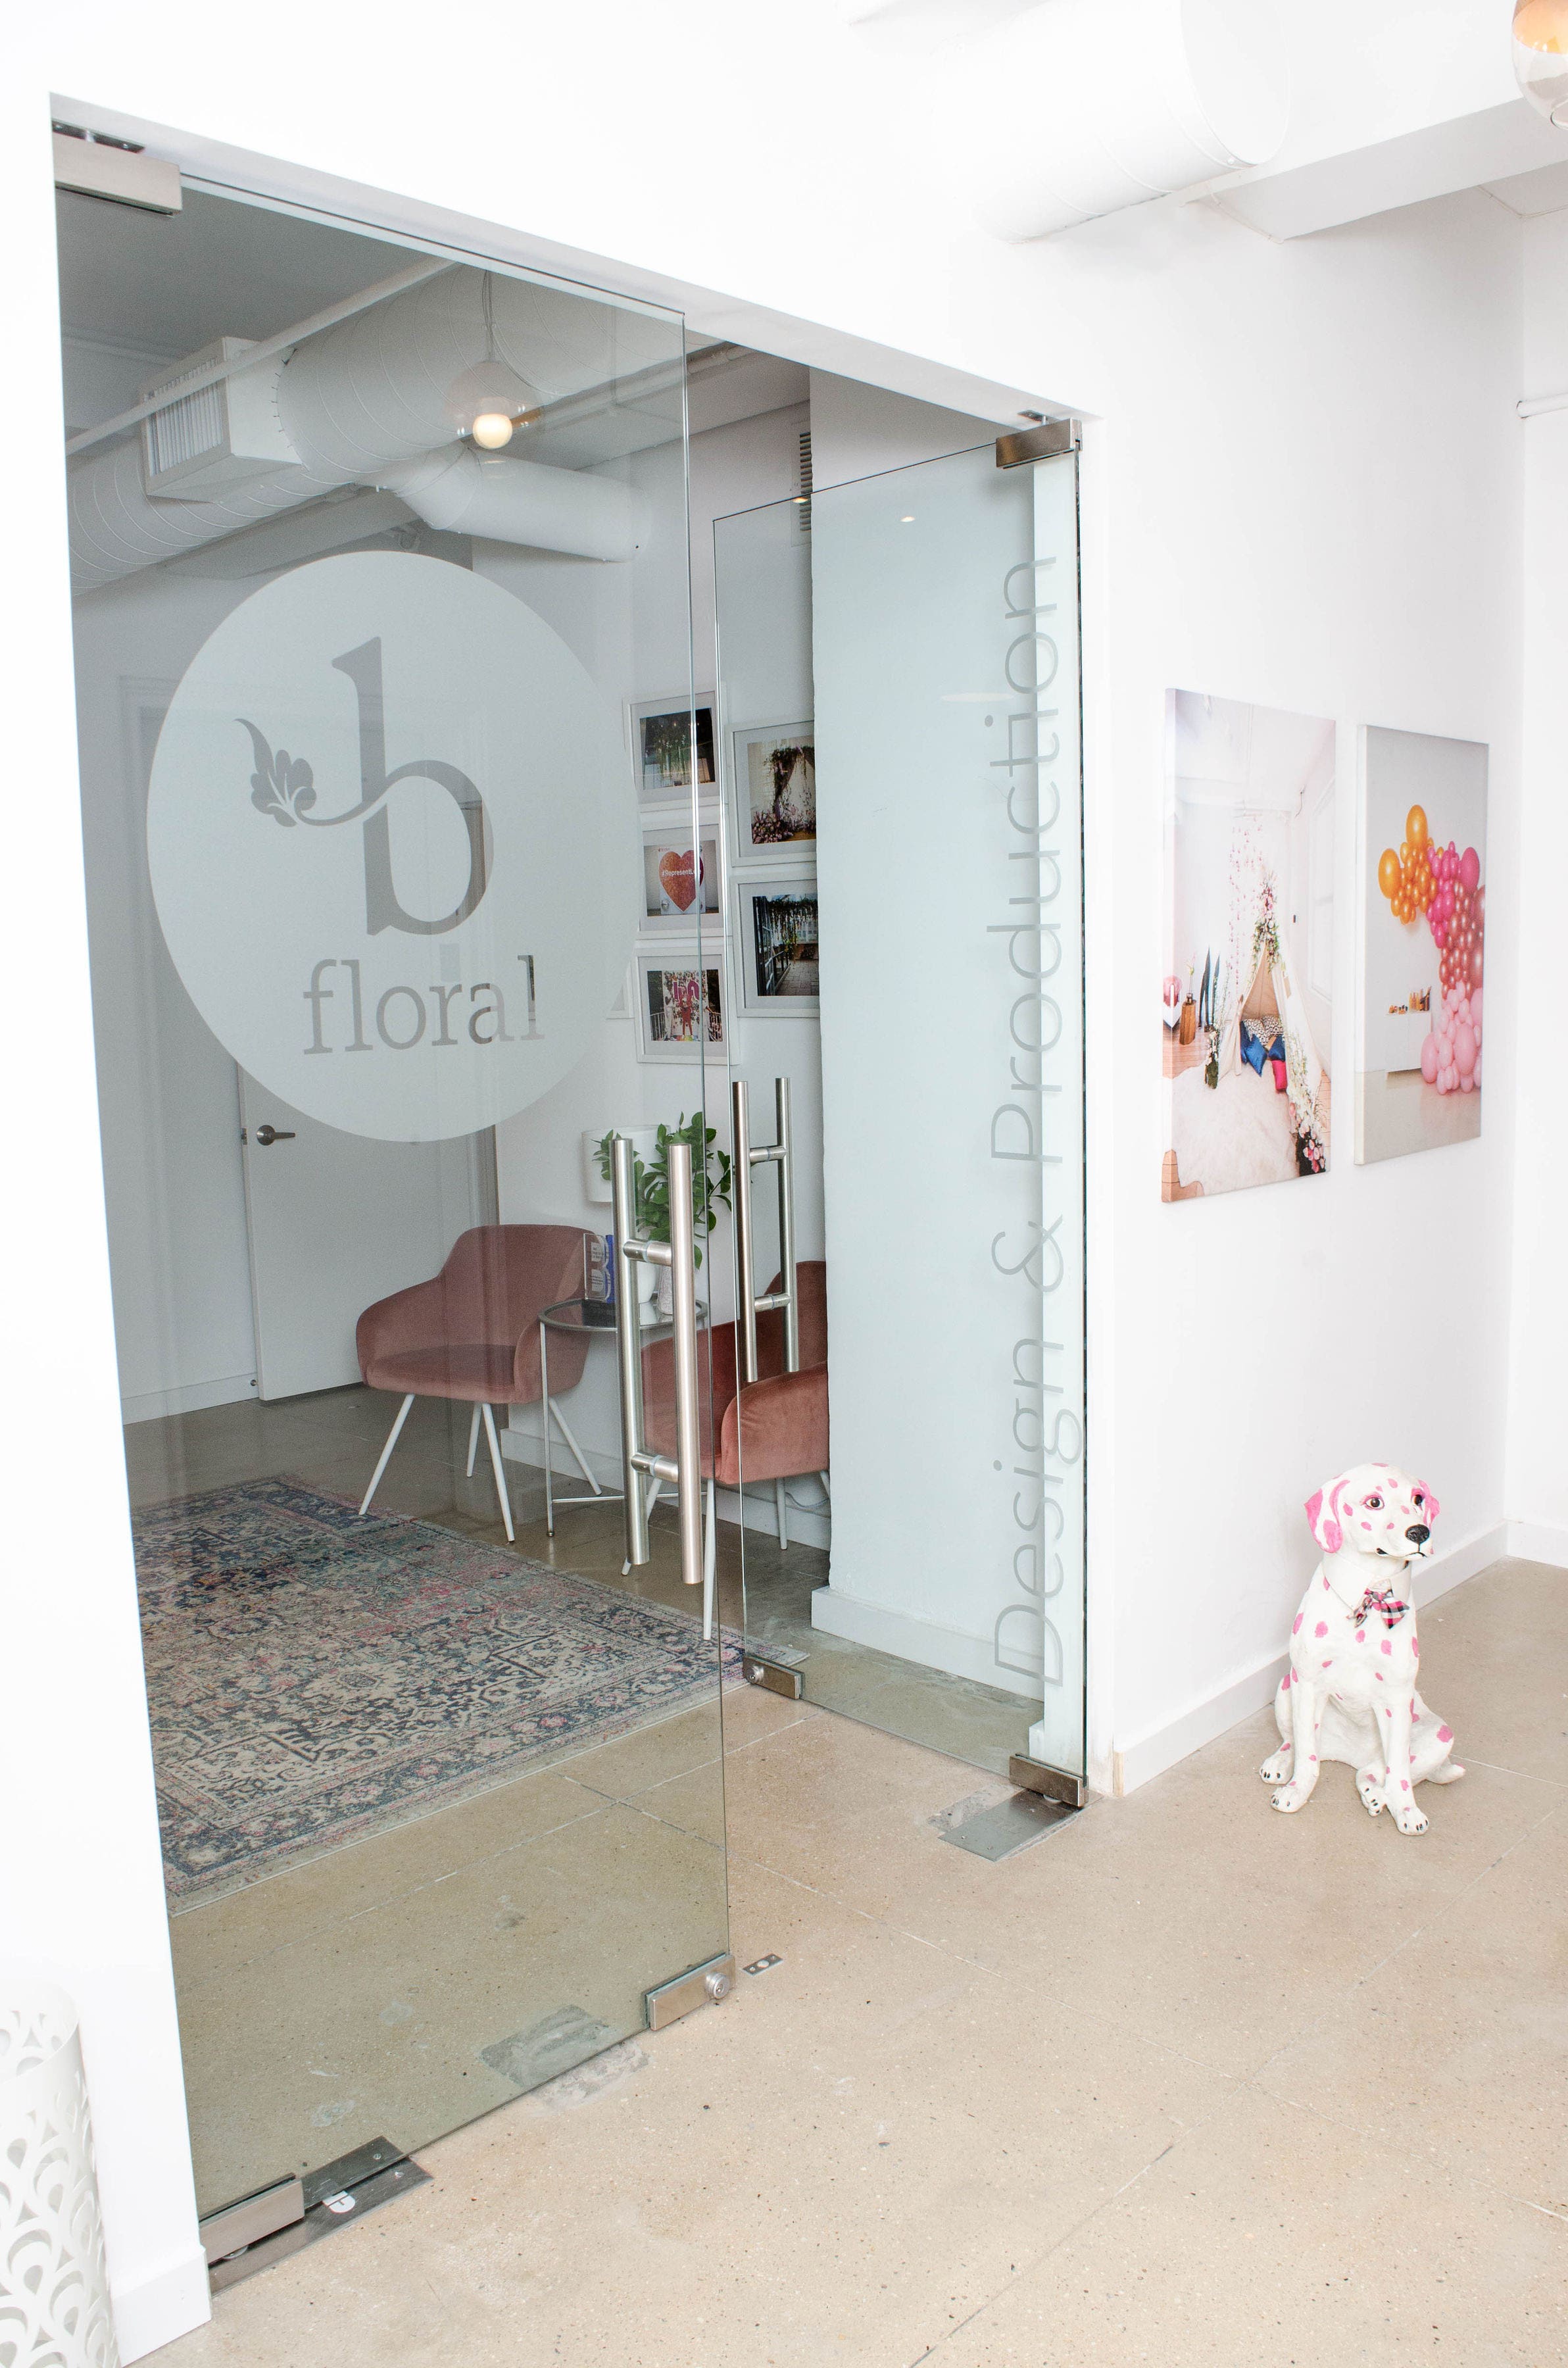 NEW - OFFICE - SPACE - MANHATTAN - COOL - OPEN - RECEPTION - B FLORAL